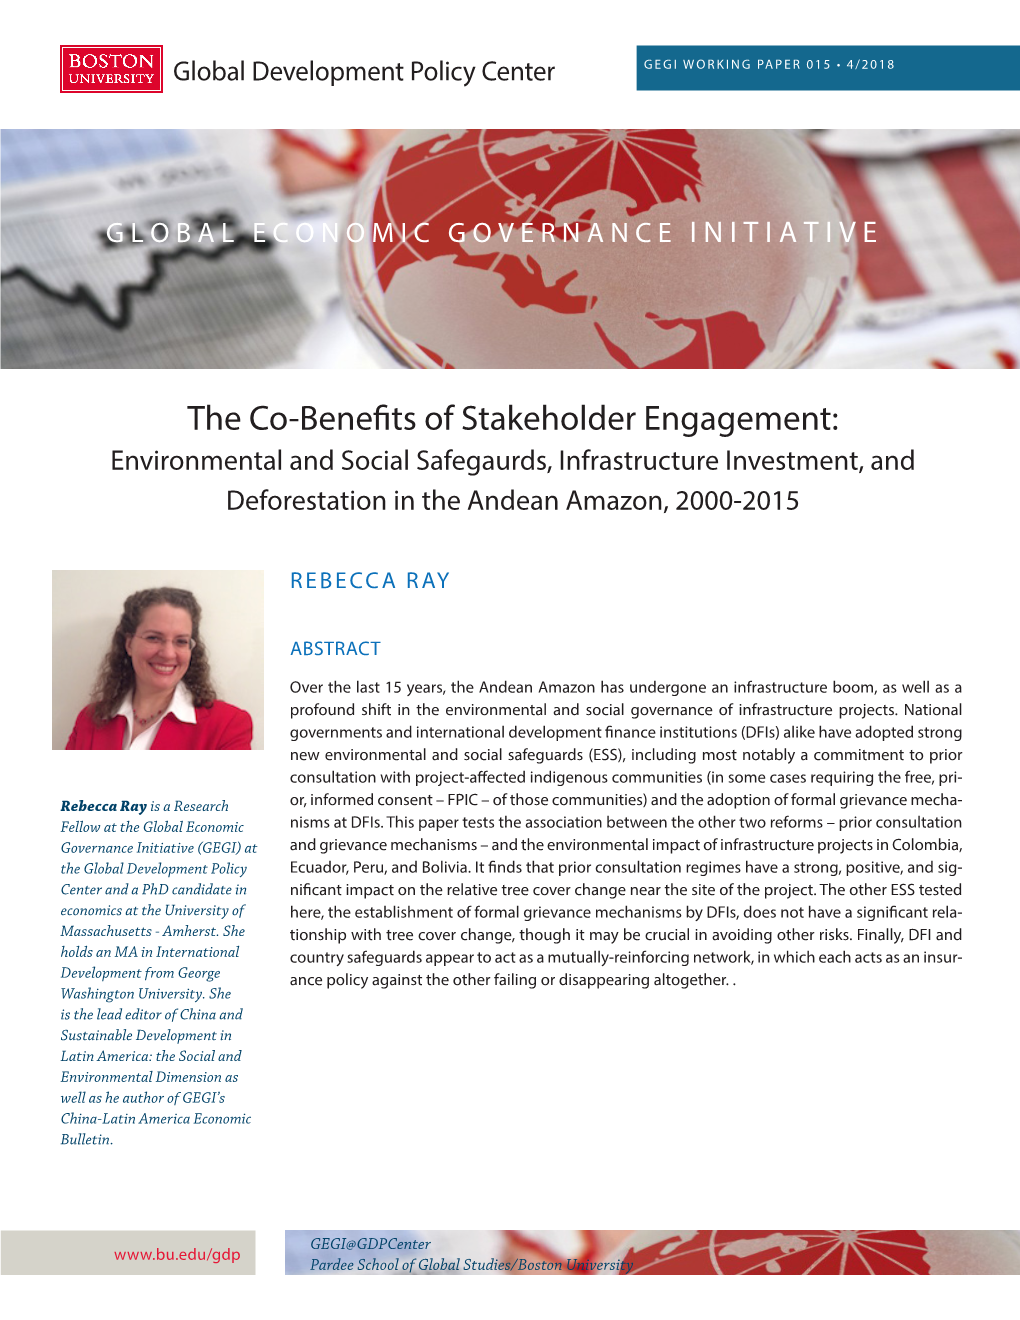 The Co-Benefits of Stakeholder Engagement